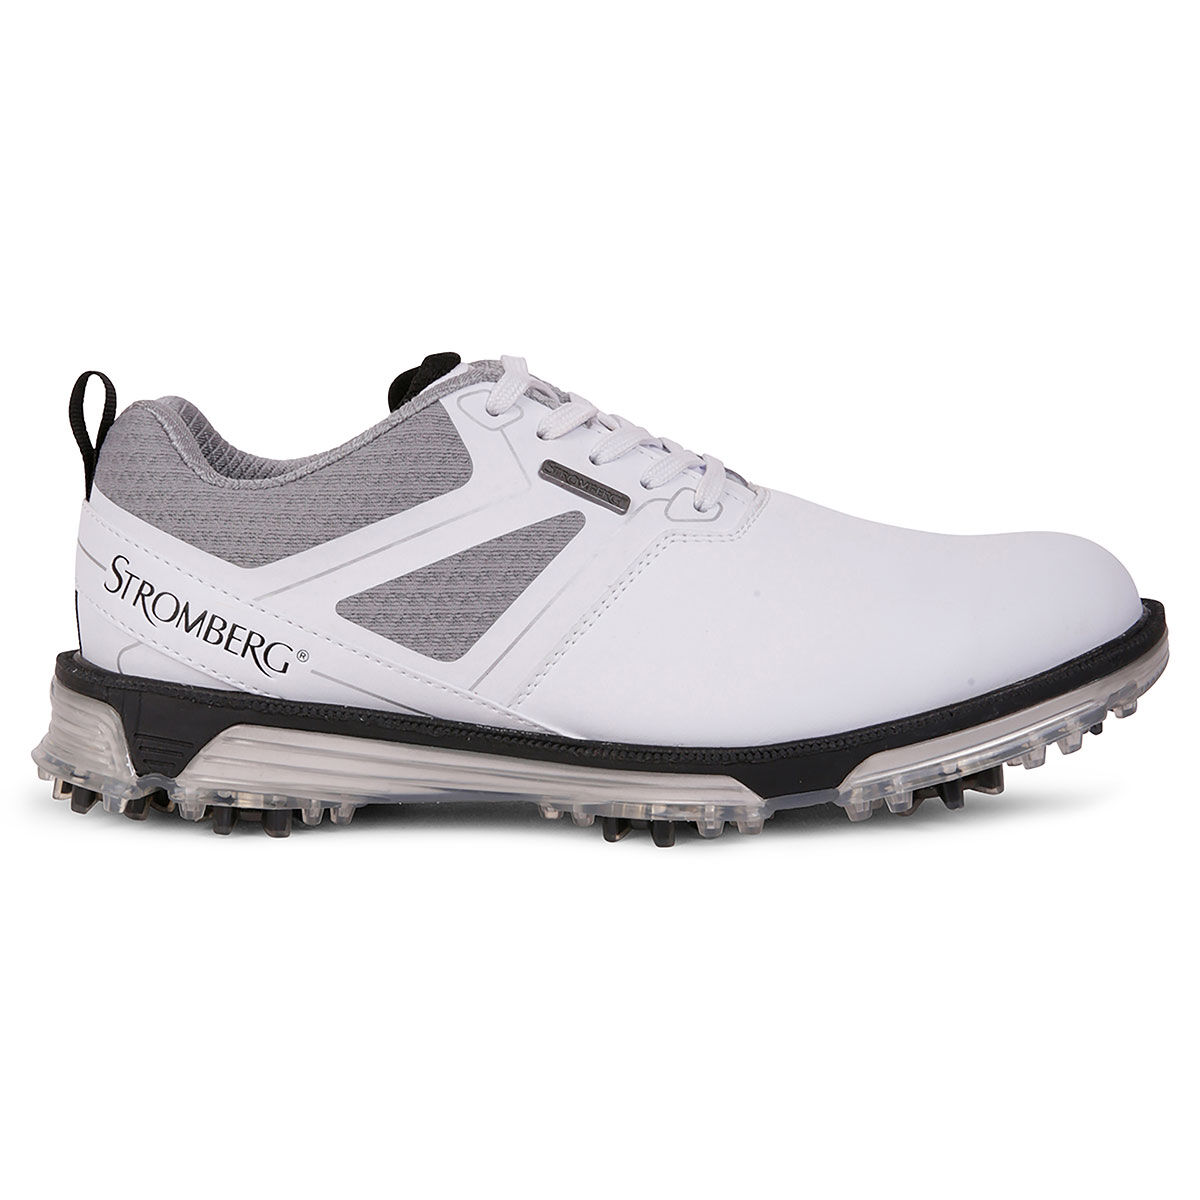 Stromberg Men's Tour Classic Waterproof Spiked Golf Shoes, Mens, White, 10 | American Golf von Stromberg